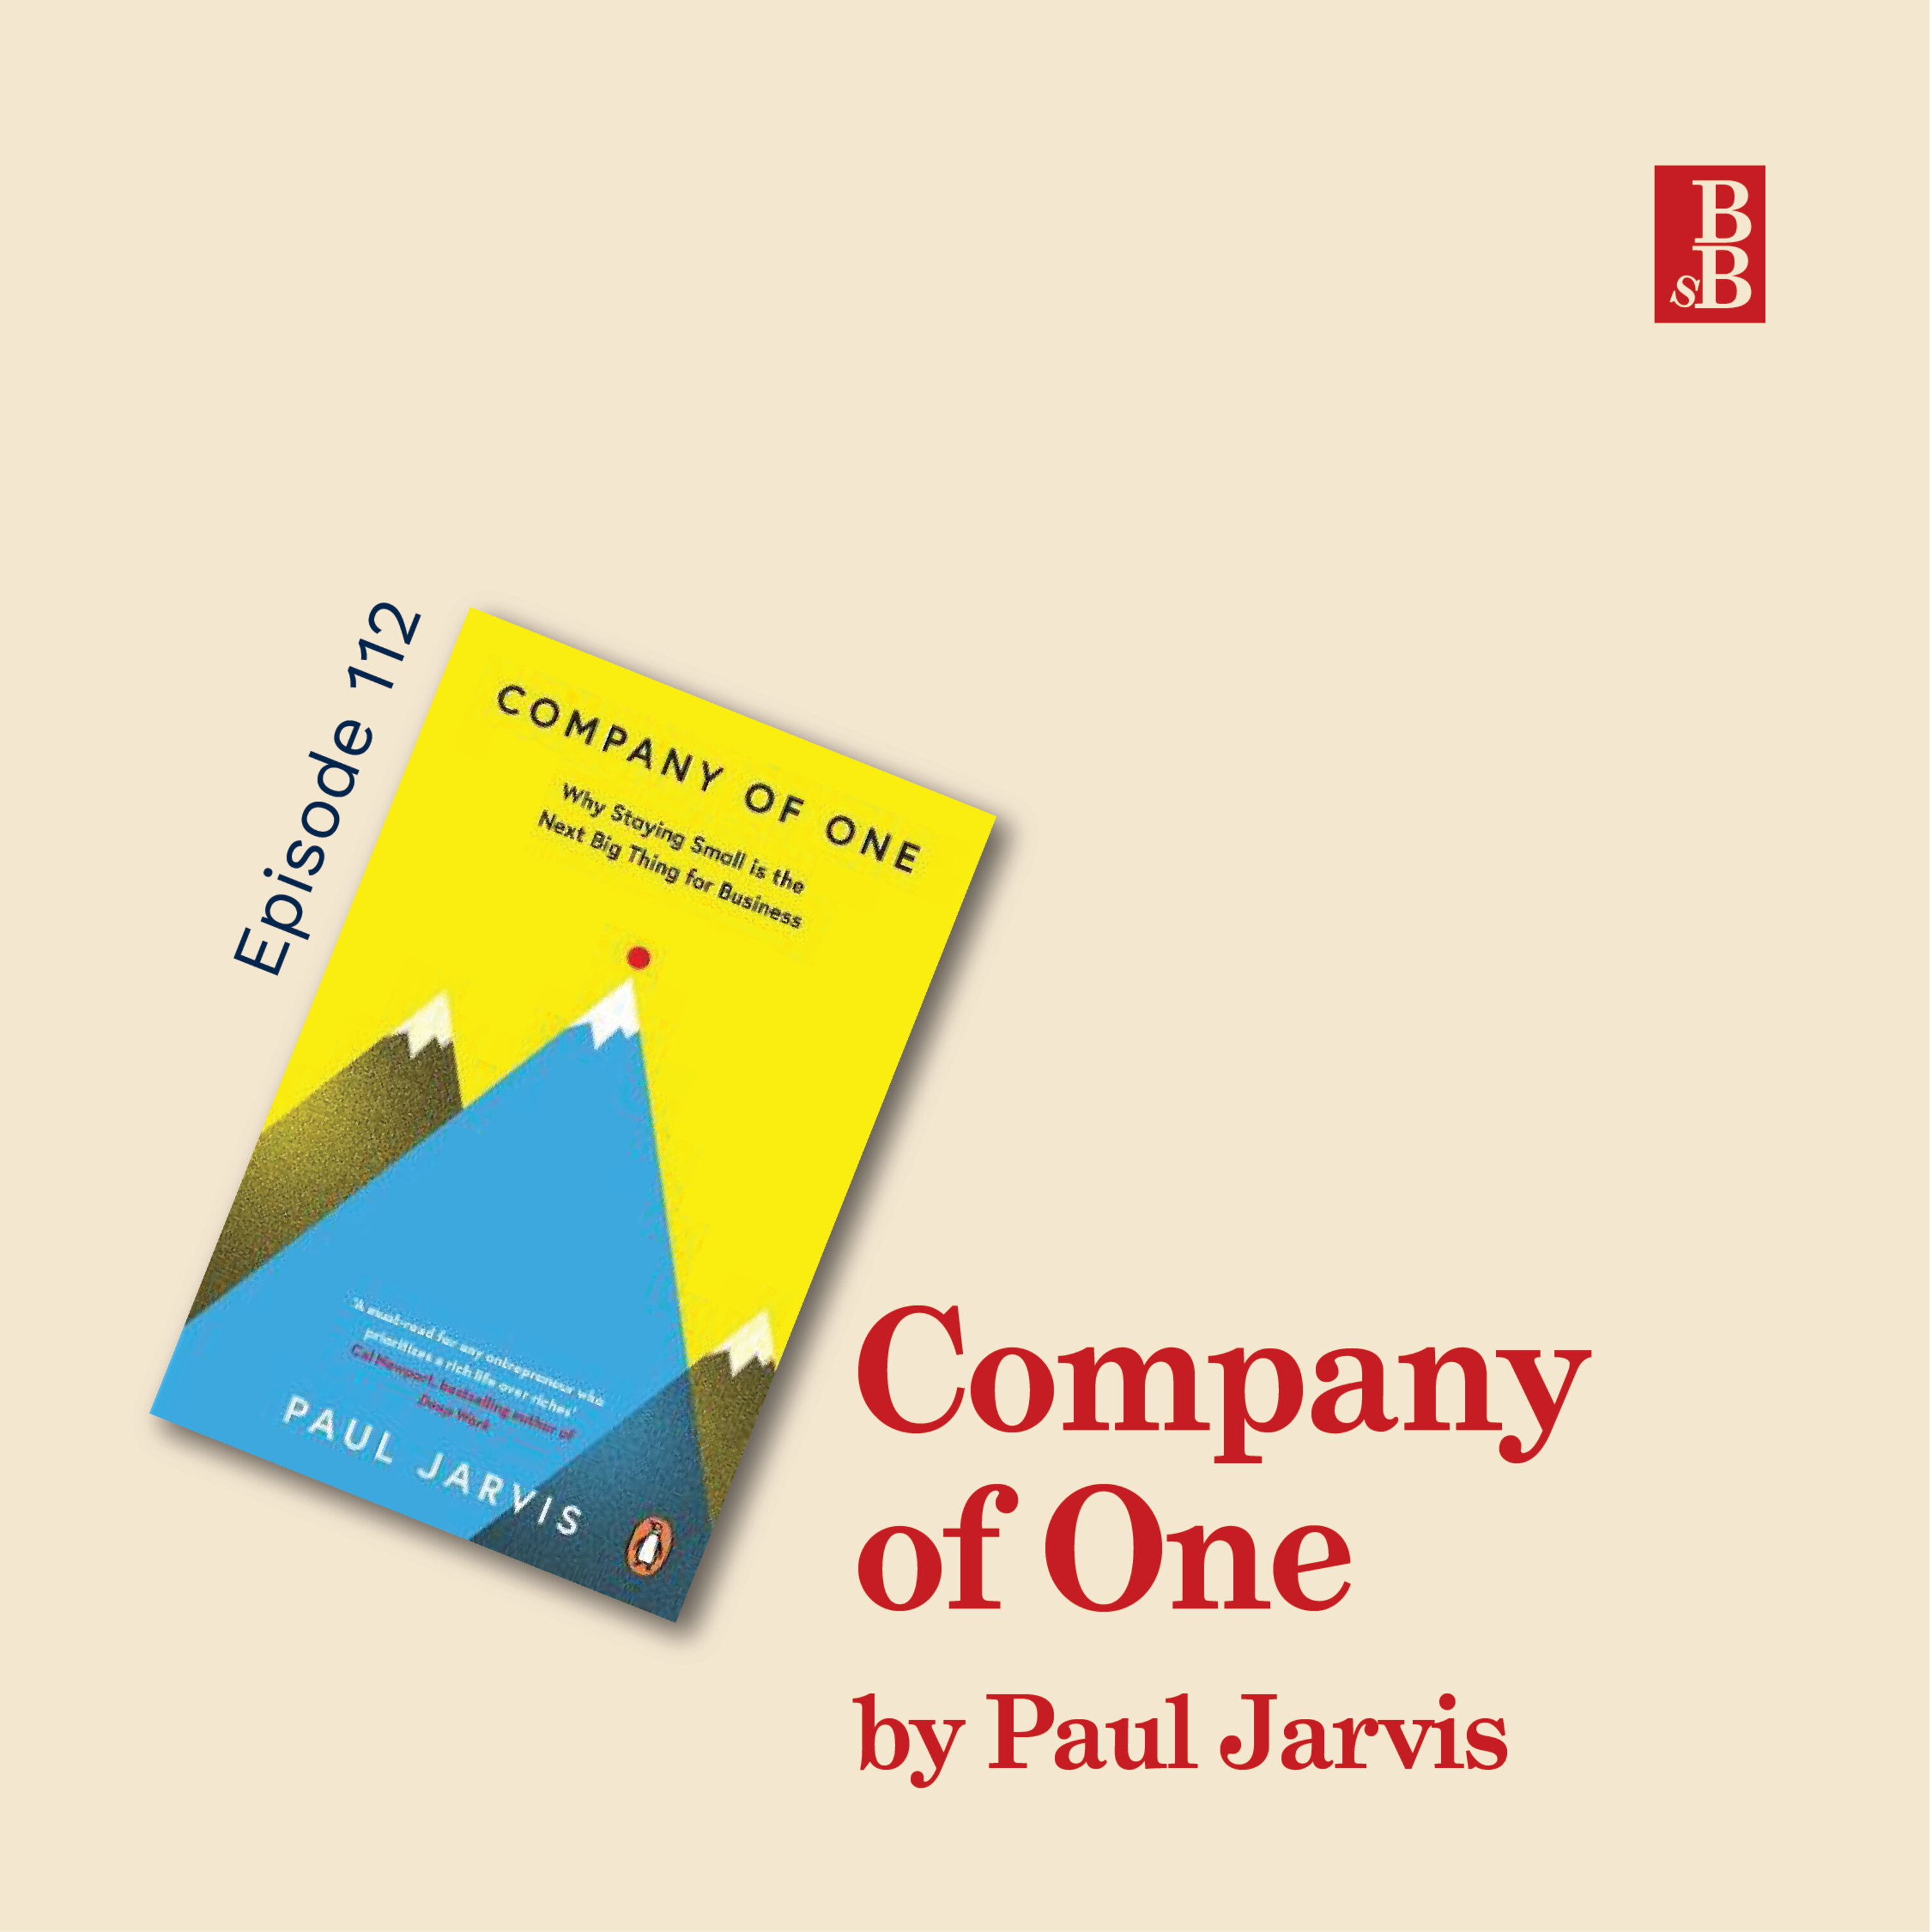 Company of One by Paul Jarvis - why you need to be better, not bigger Image